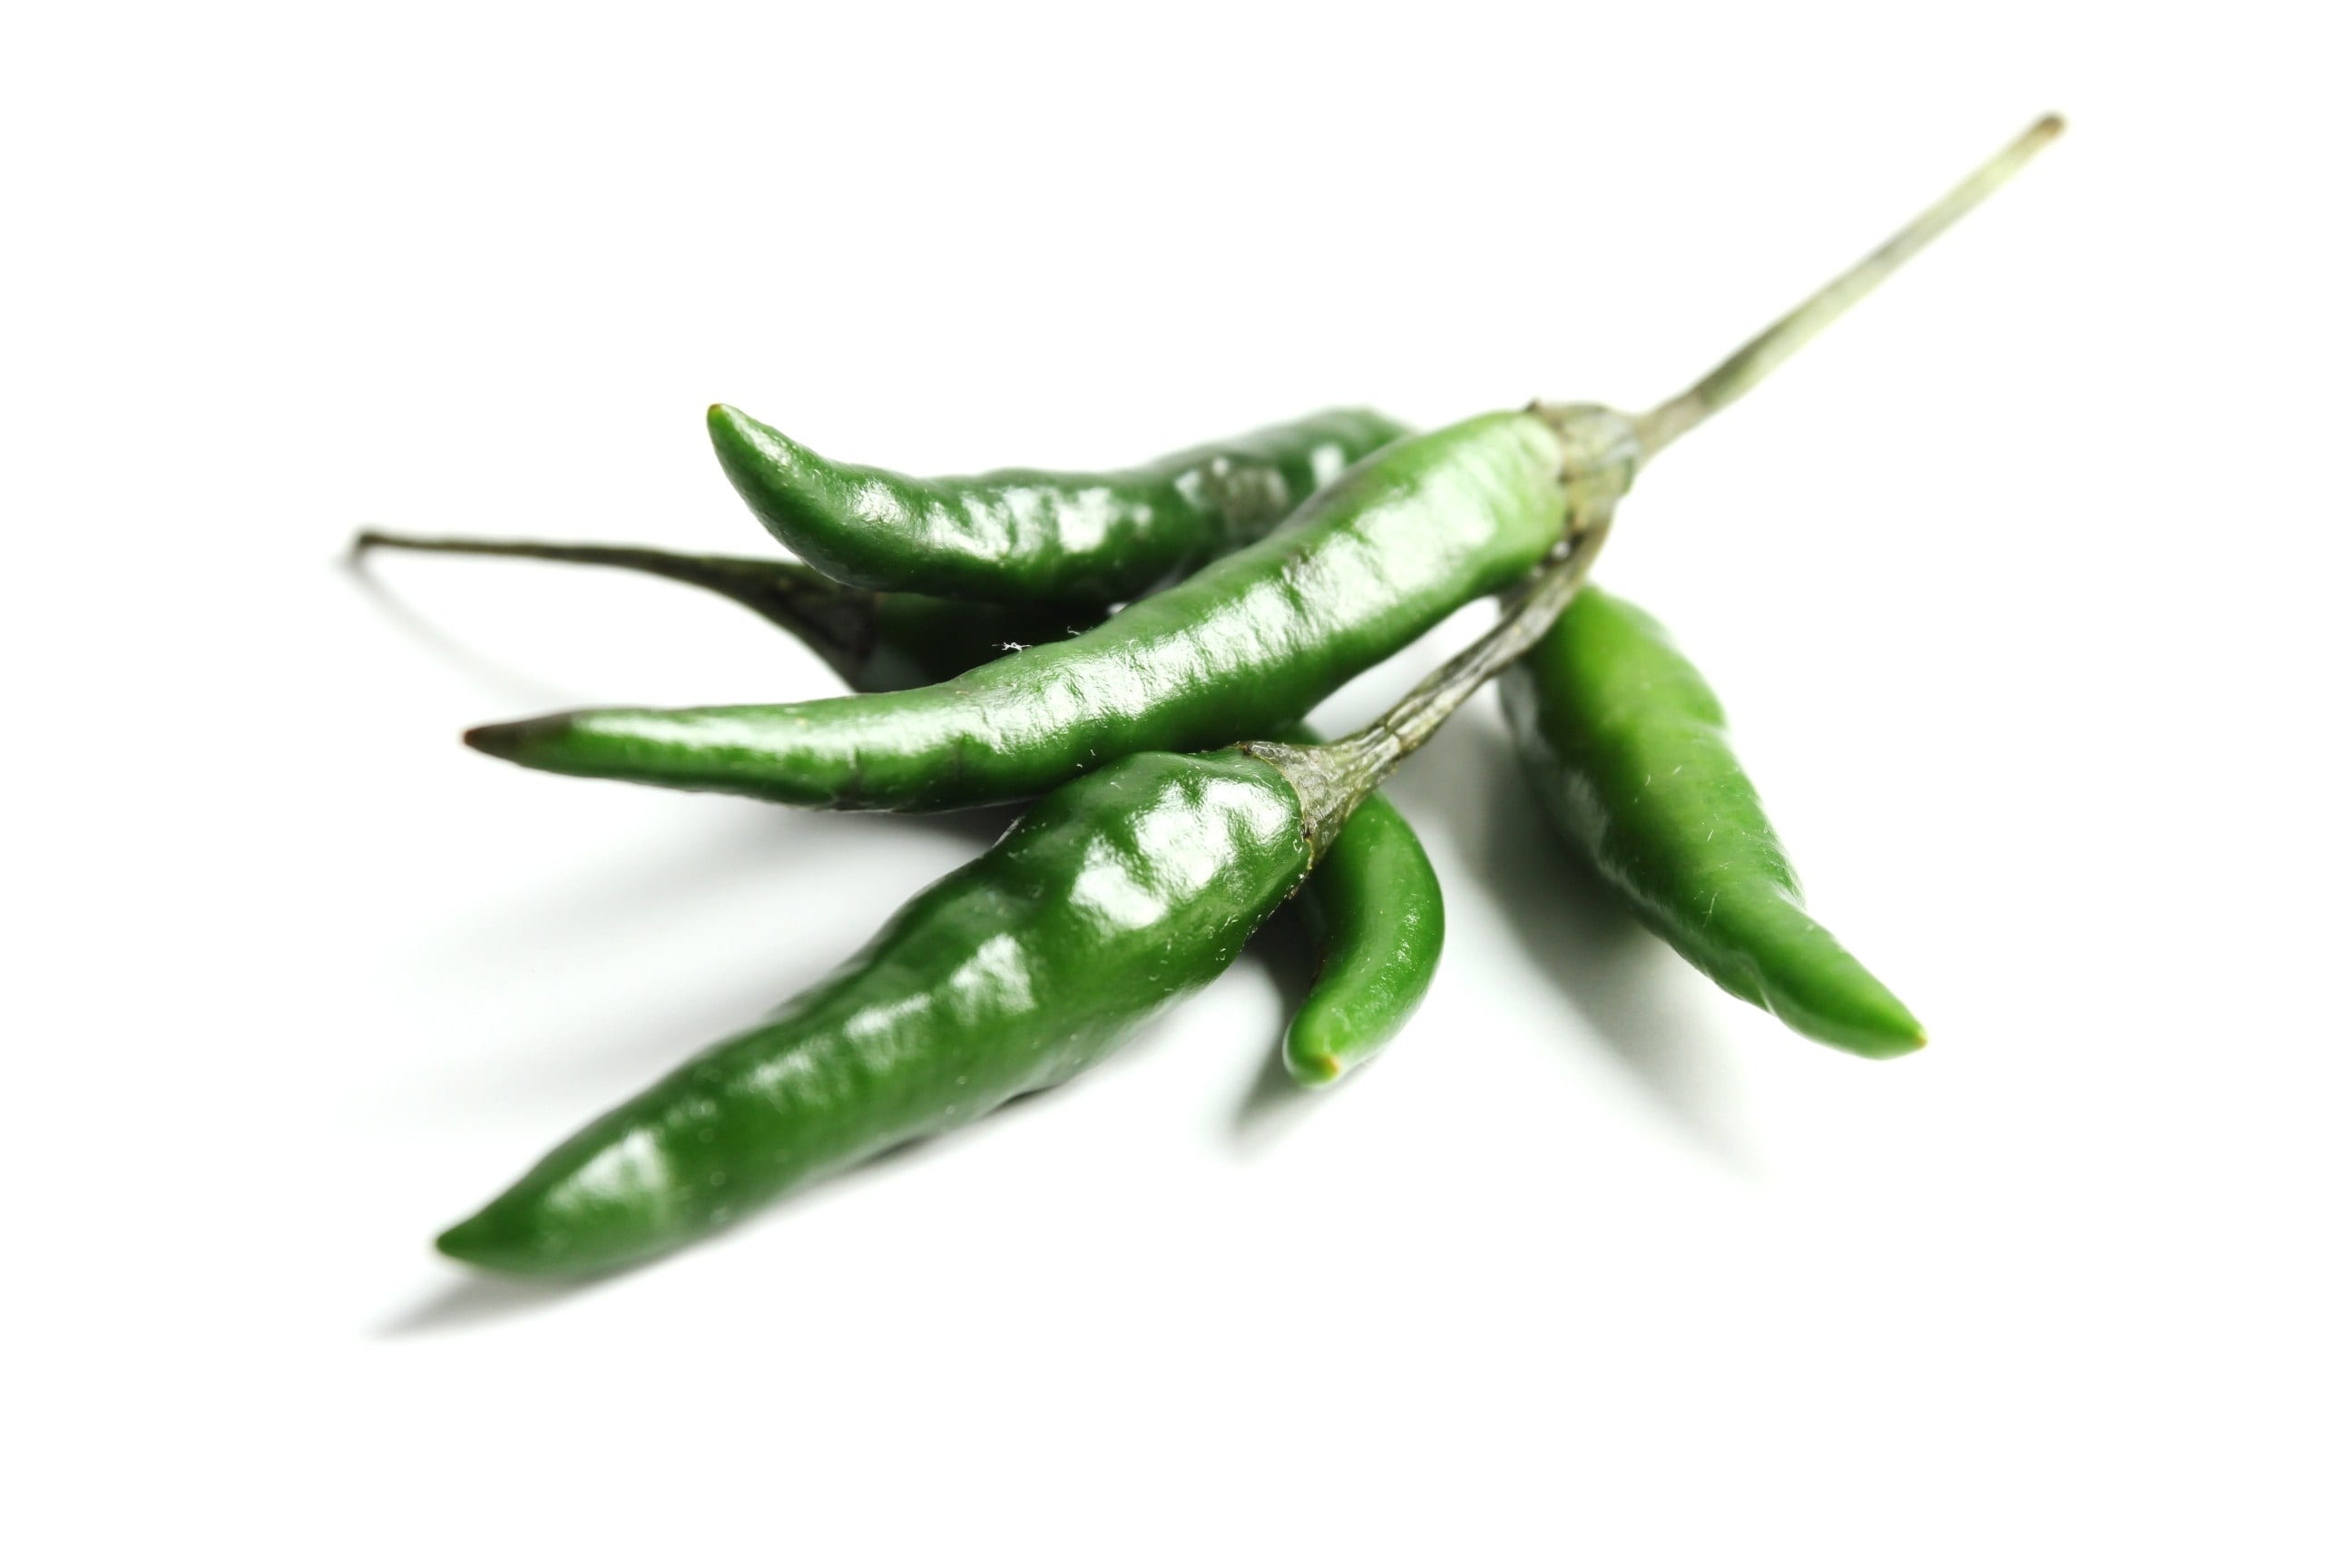 green chilli, hot, spicy, healthy, fresh, organic, eating, cooking